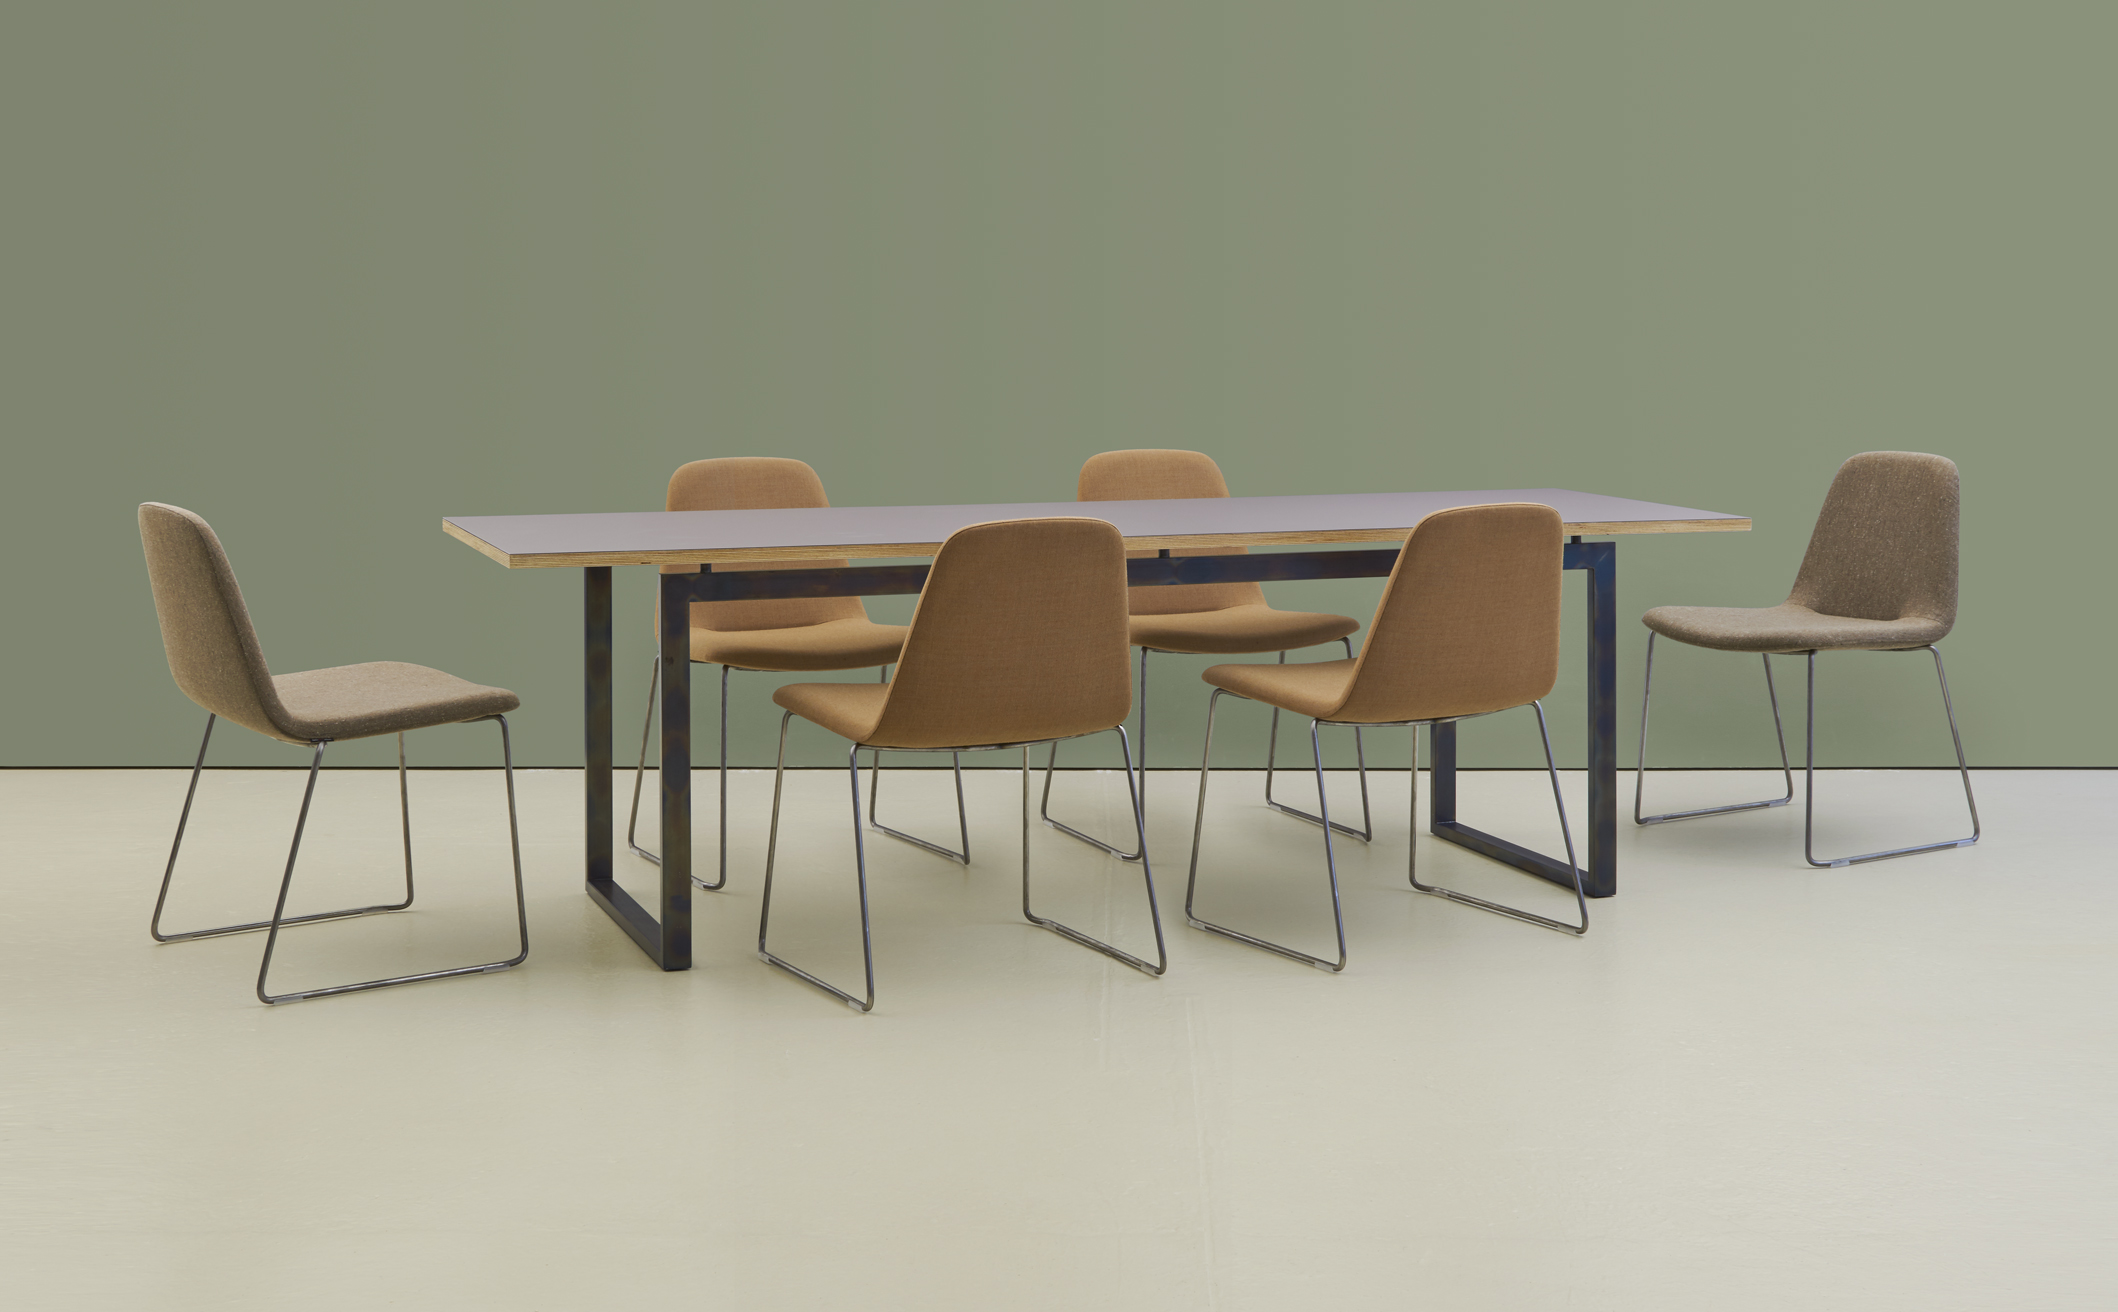 hm107c with hm58a chairs in laquered raw steel (low res).jpg